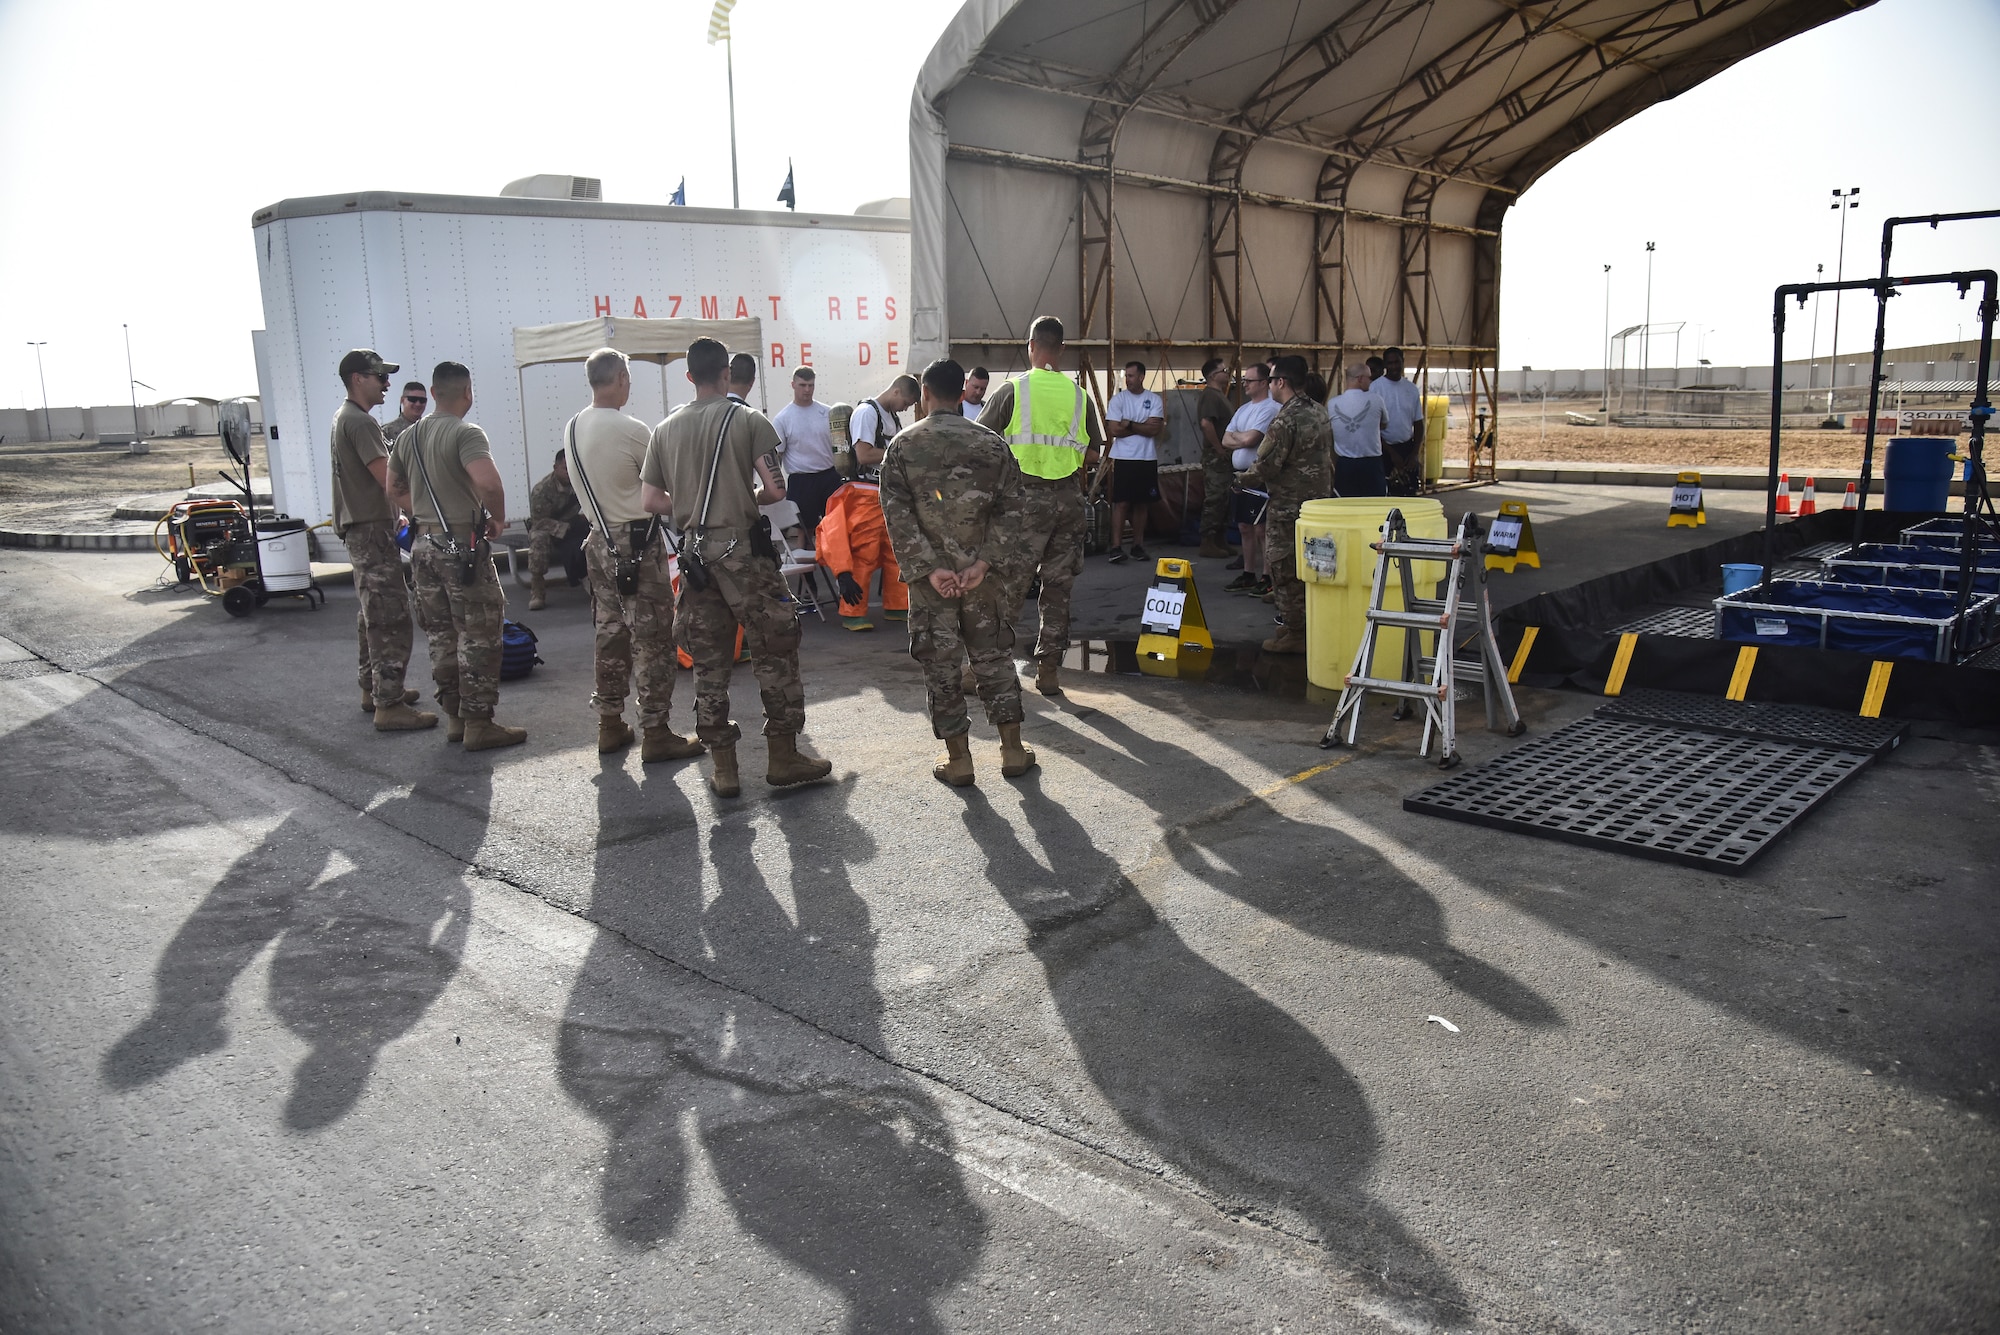 U.S. Airmen assigned to the 380th Expeditionary Civil Engineer Squadron gather for a safety briefing during a hazardous materials exercise at Al Dhafra Air Base, United Arab Emirates, Jan. 4, 2019. The exercise was designed to be a Department of Defense certification for three Airmen in the Fire Department and an annual refresher training for the Emergency Management flight. The Airmen were instructed to contain leaks on a pressurized chlorine cylinder, a one-ton cryo-tank, and a rail car, all after donning a Level-A suit. (U.S. Air Force photo by Senior Airman Mya M. Crosby)